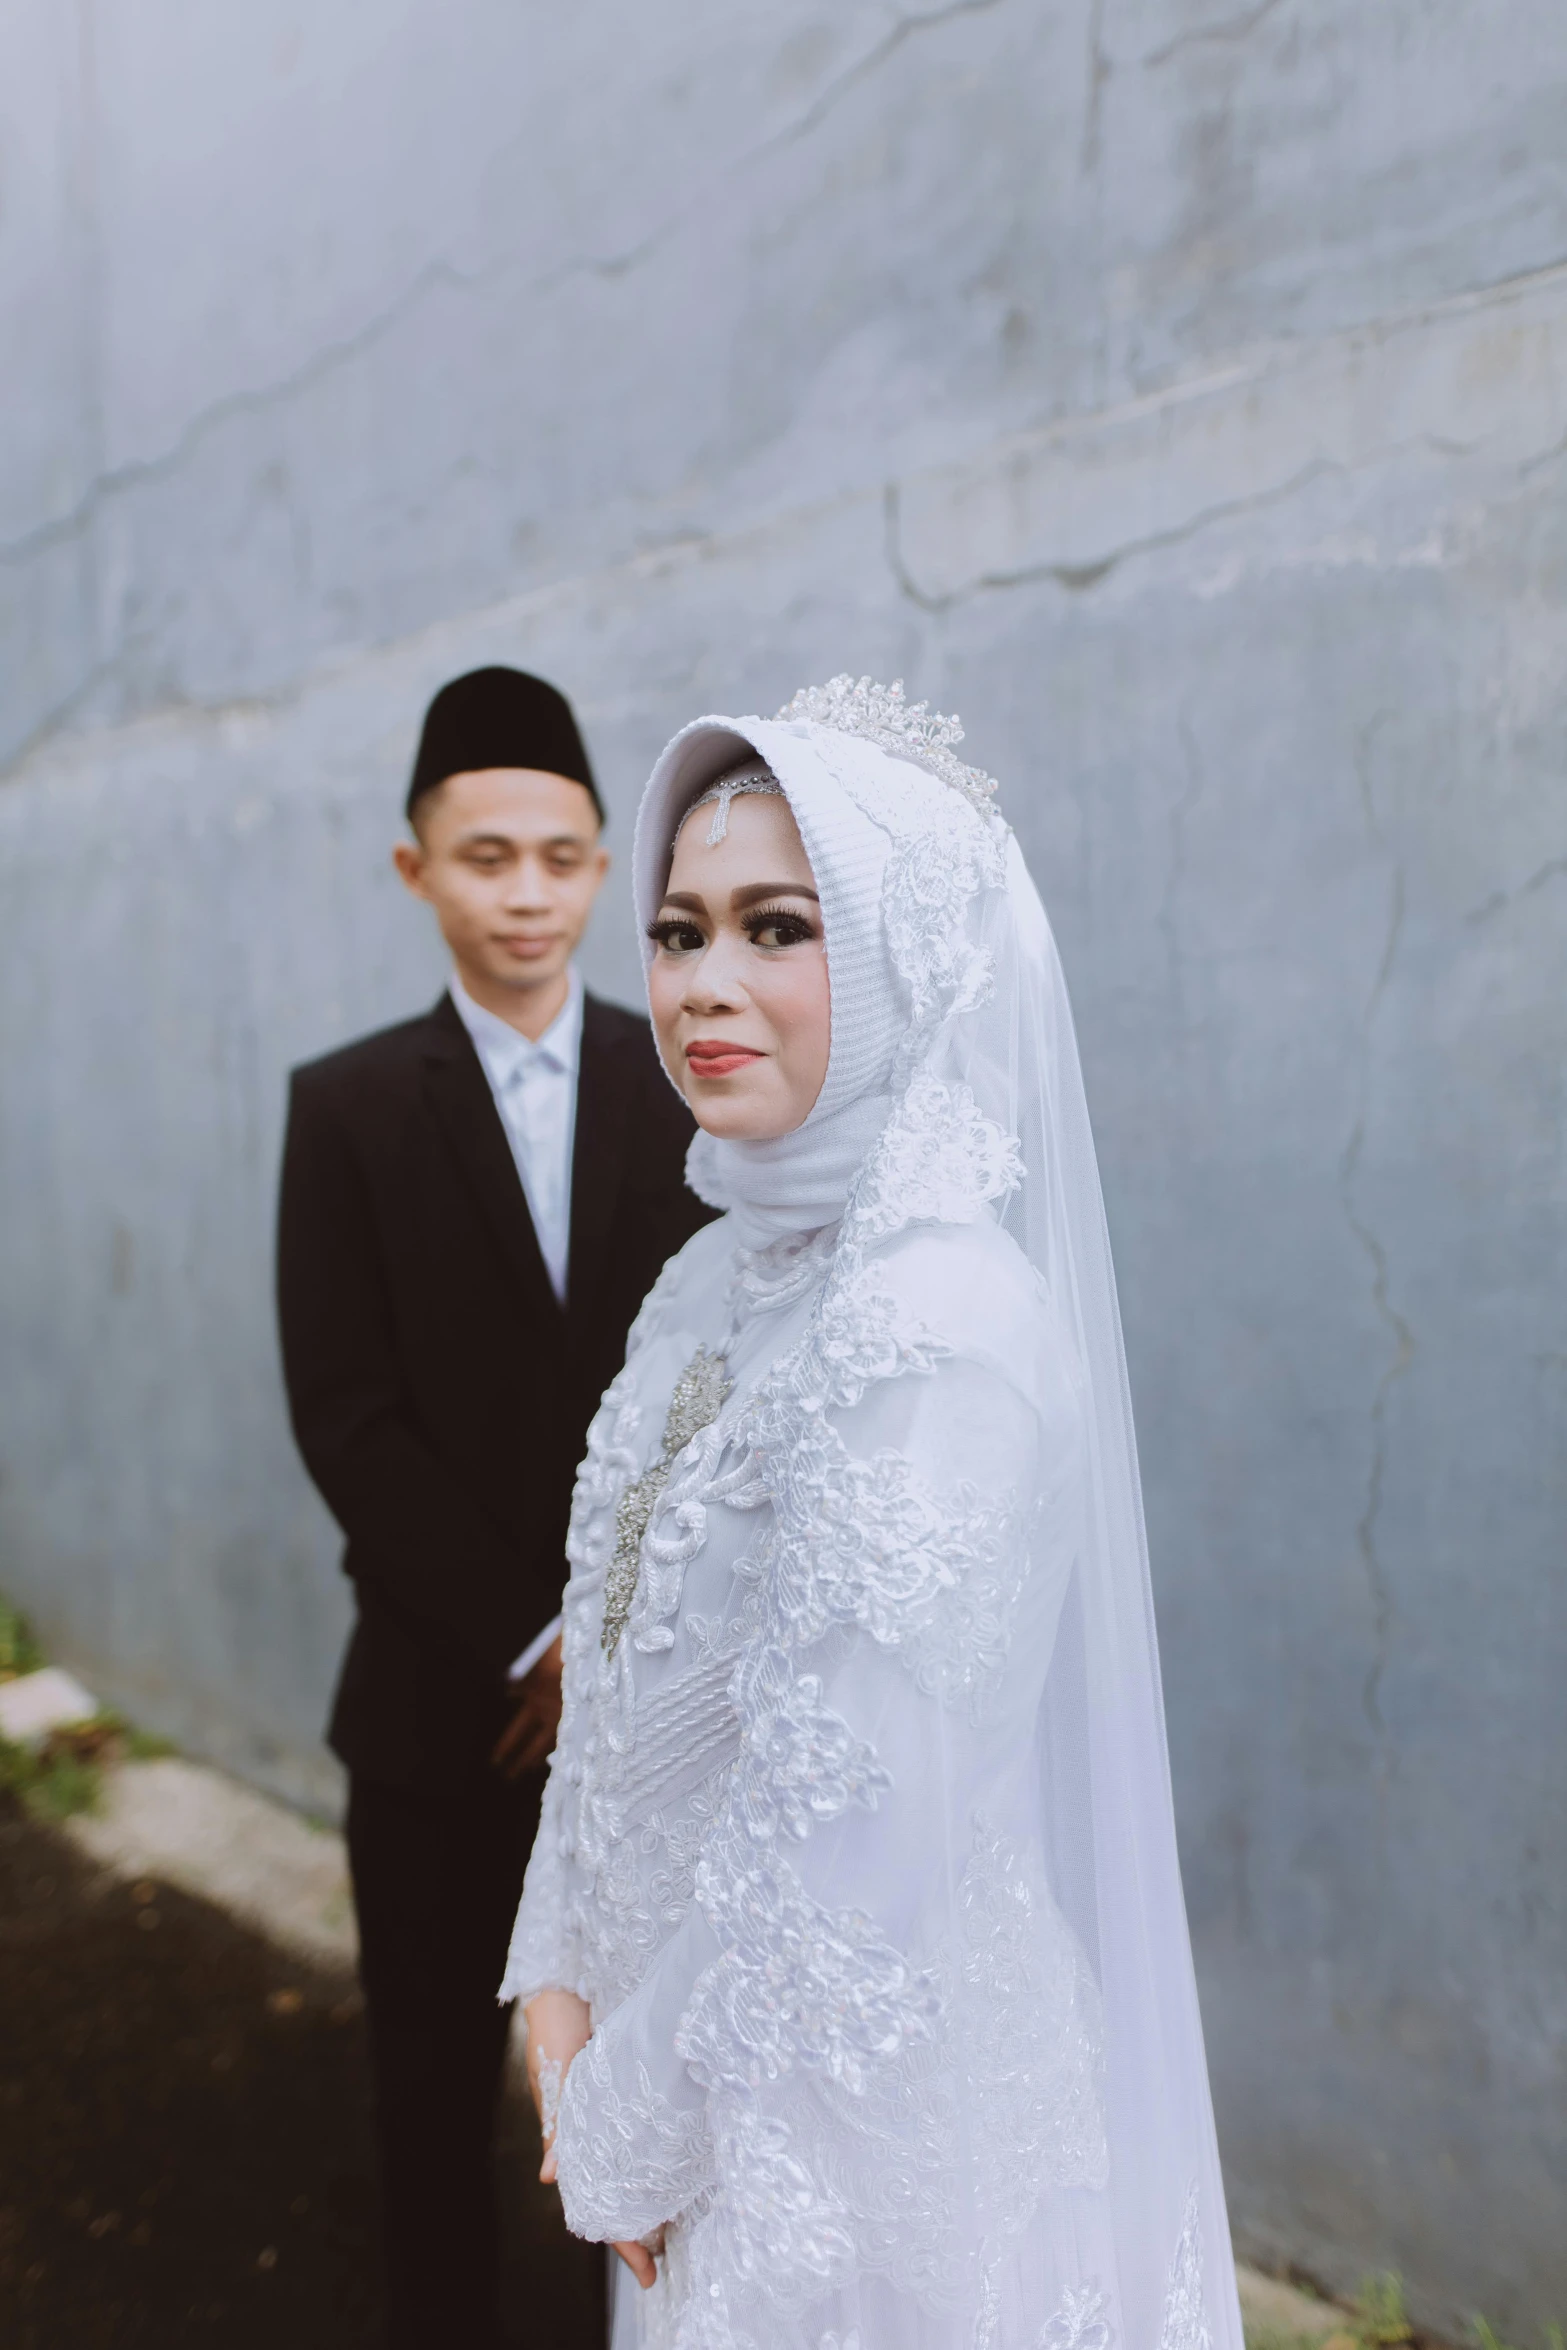 a couple posing for a pograph while dressed in wedding attire